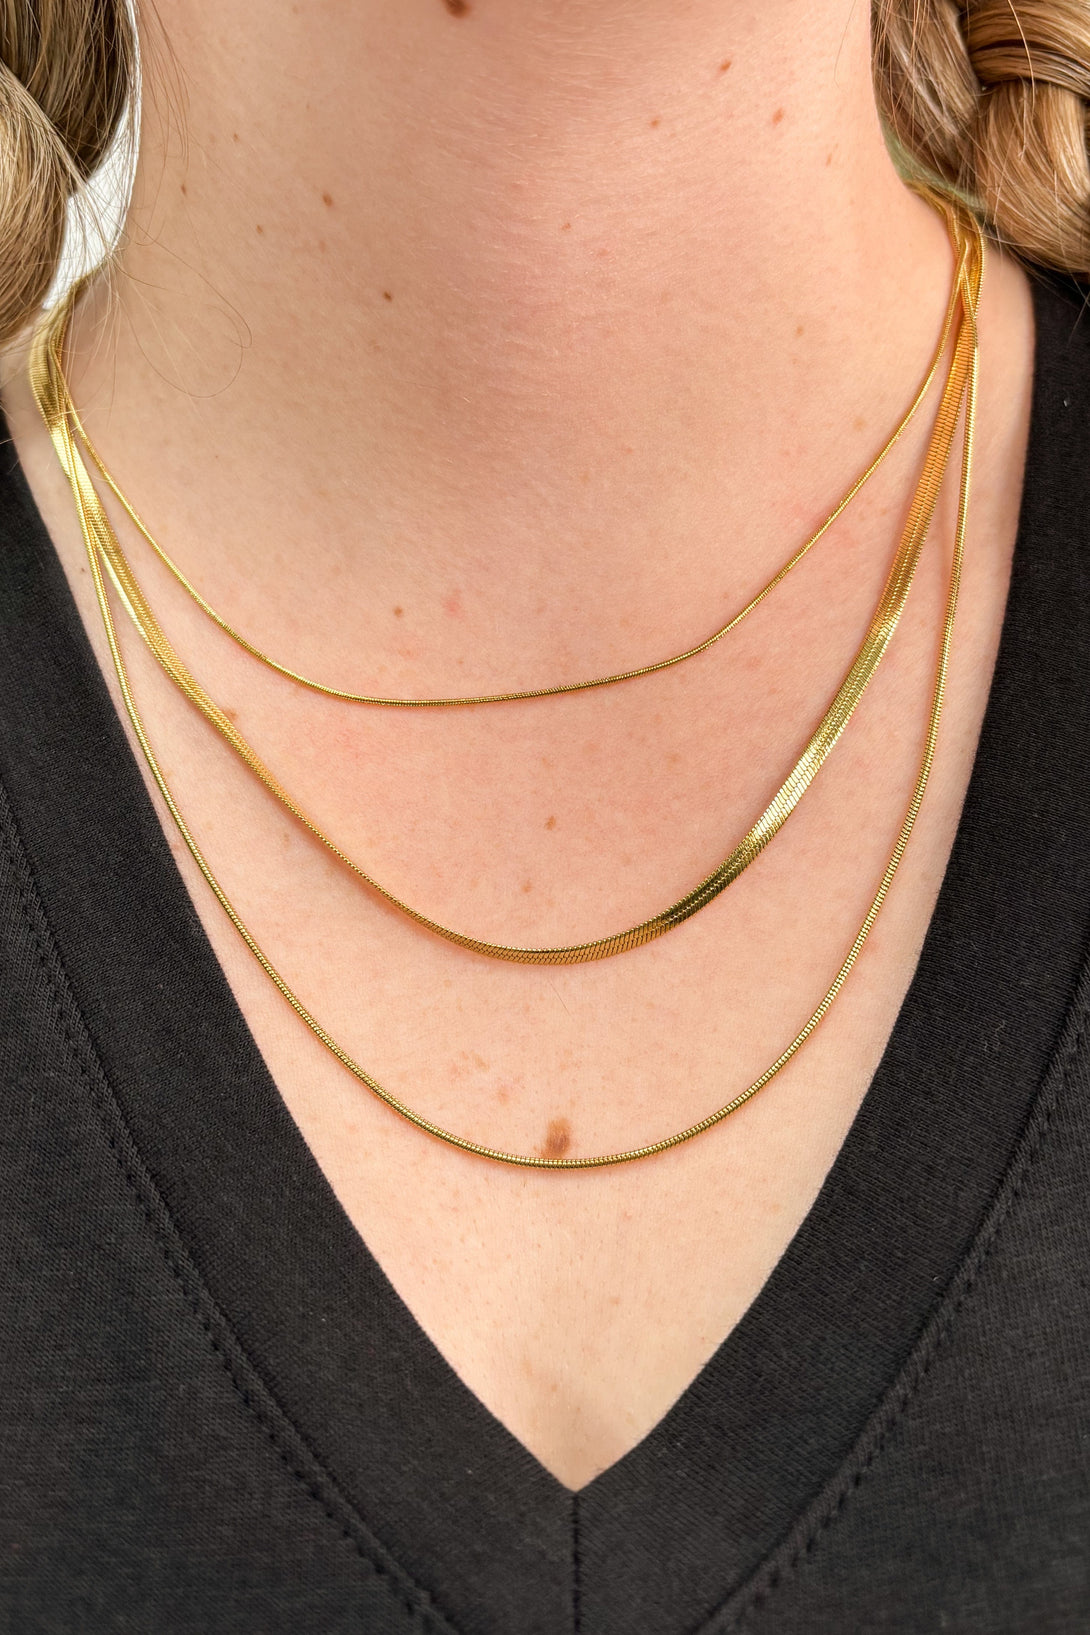 Three Strand Gold or Silver Plated Snake Chain Necklace